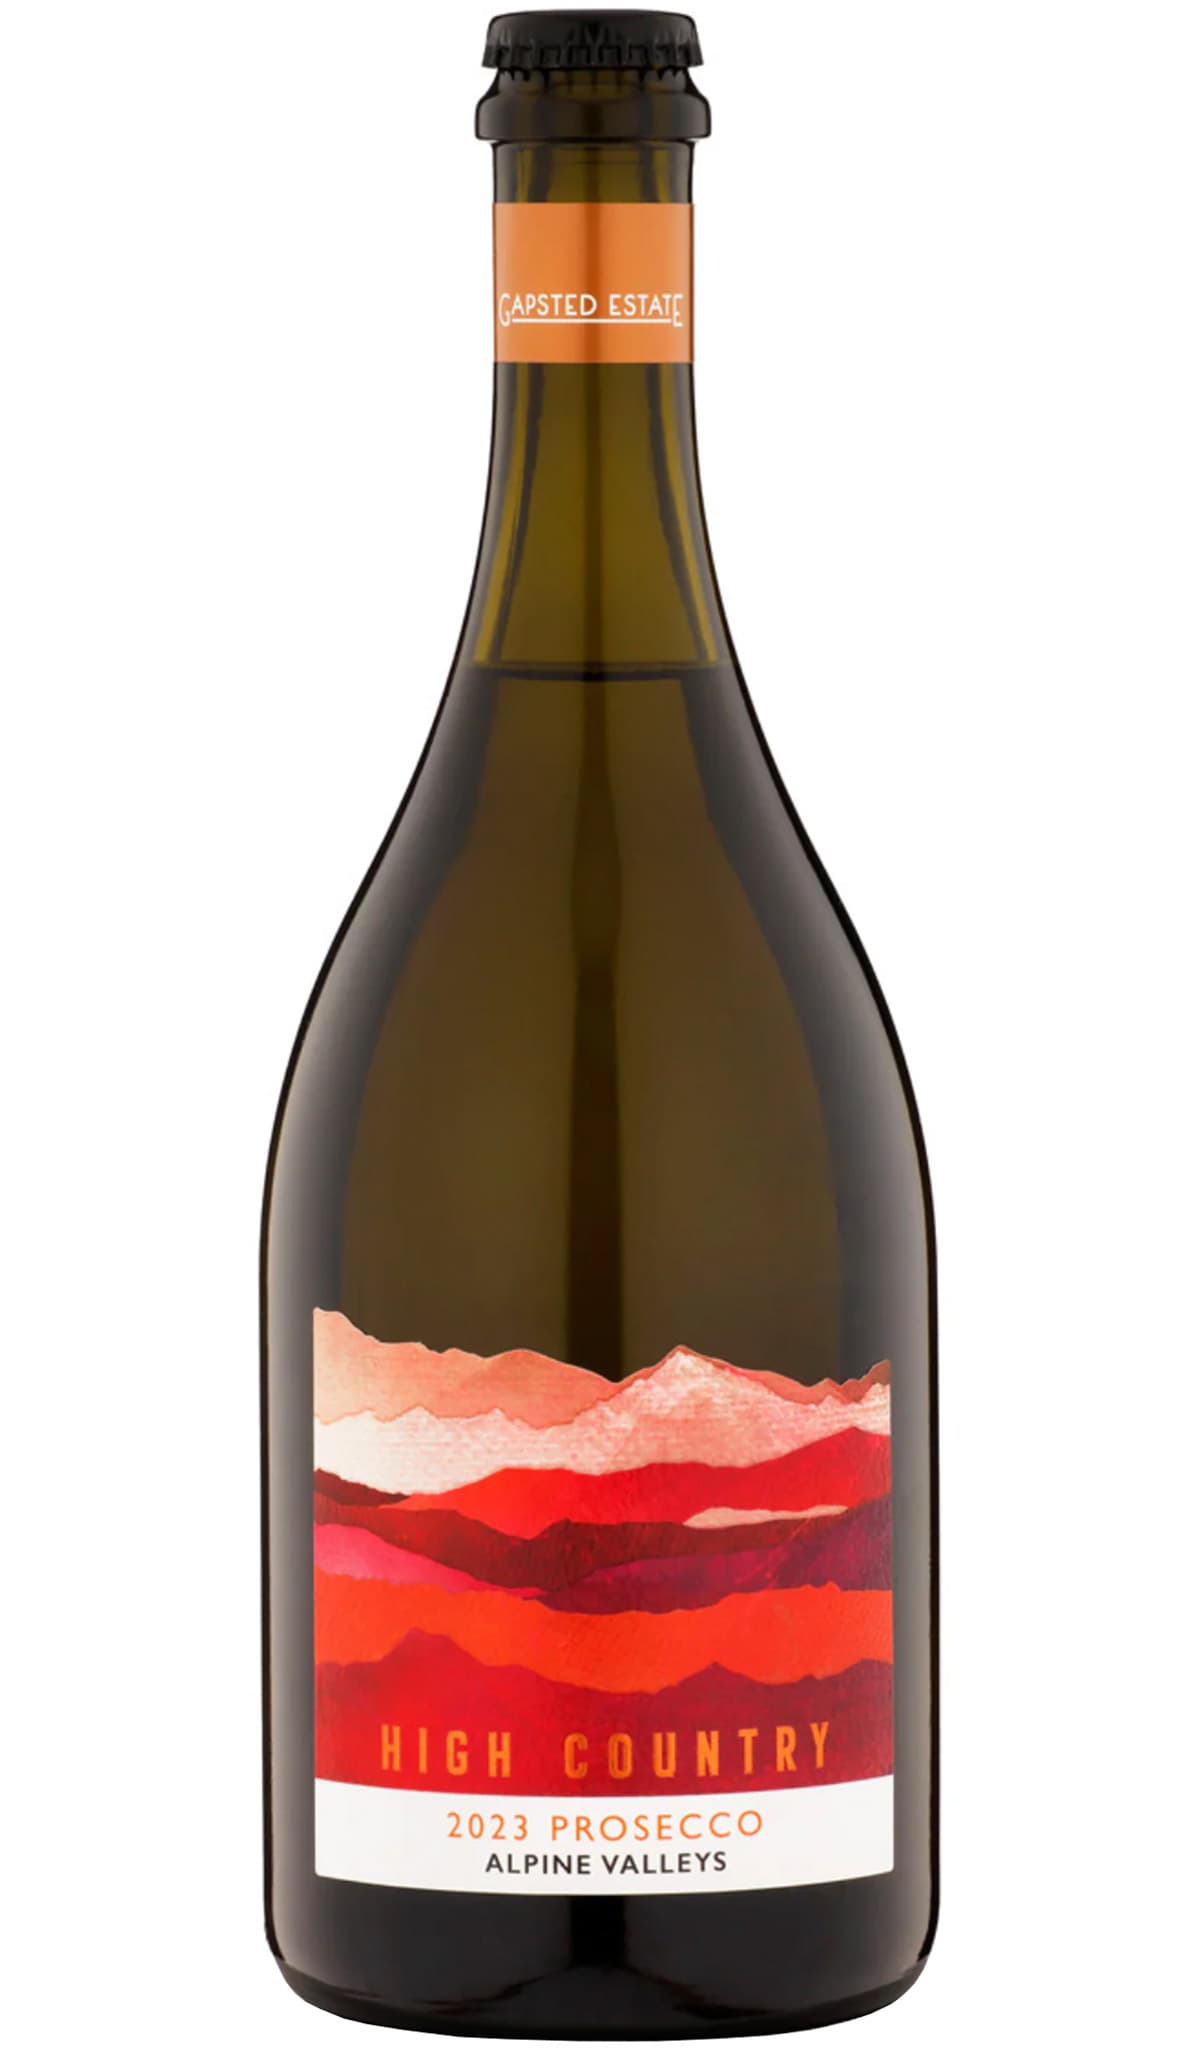 Find out more or buy Gapsted High Country Prosecco 2023 750mL online at Wine Sellers Direct - Australia’s independent liquor specialists.